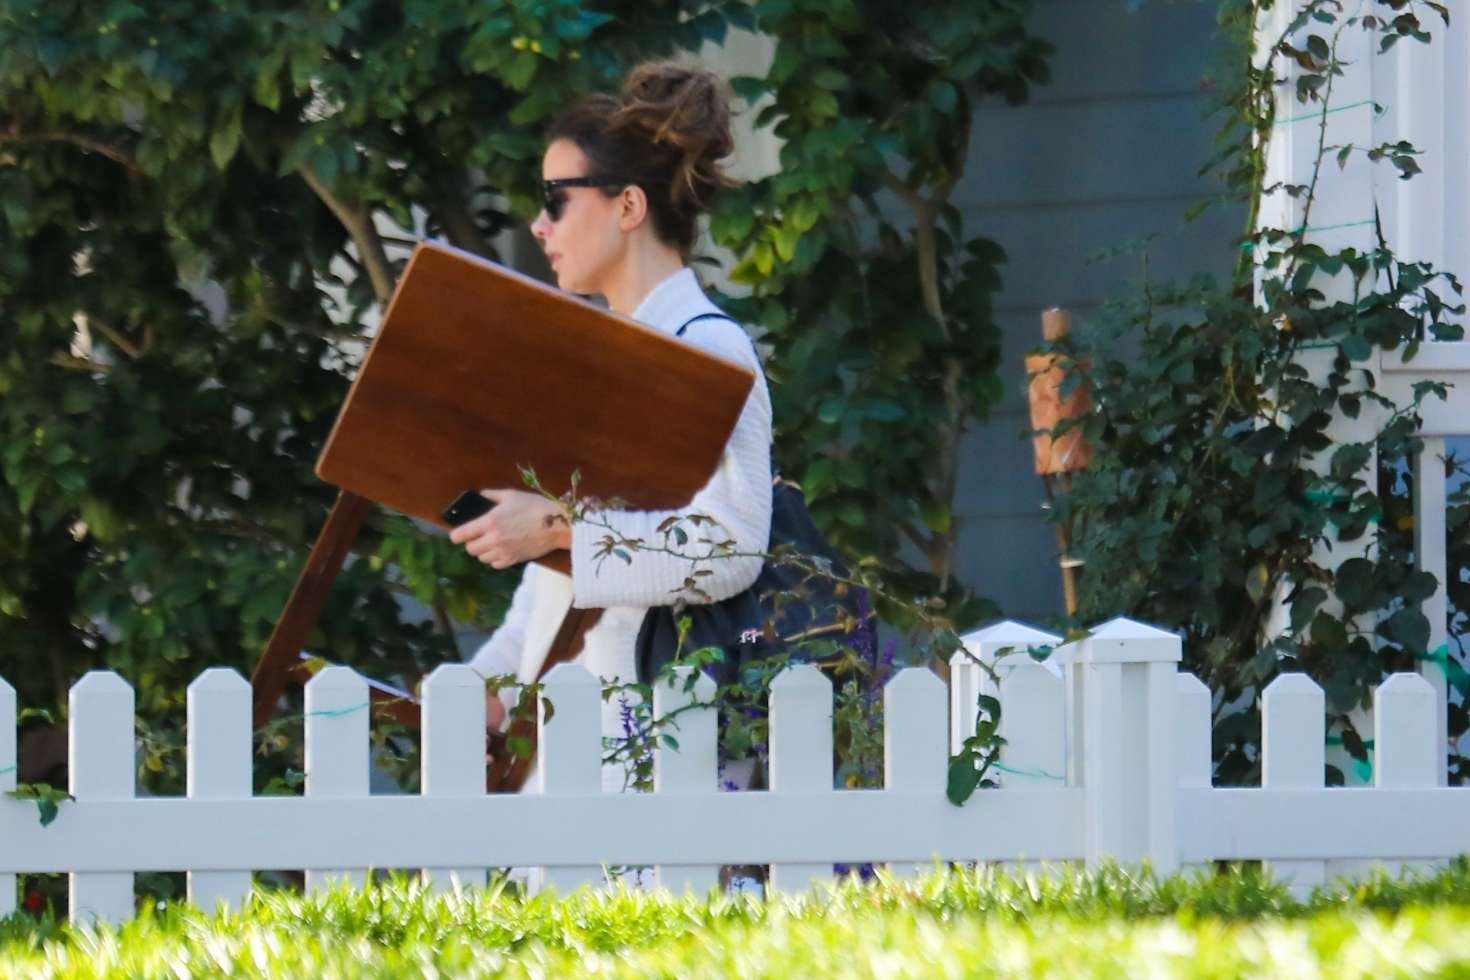 Kate Beckinsale â€“ Goes to a painting class in Westwood